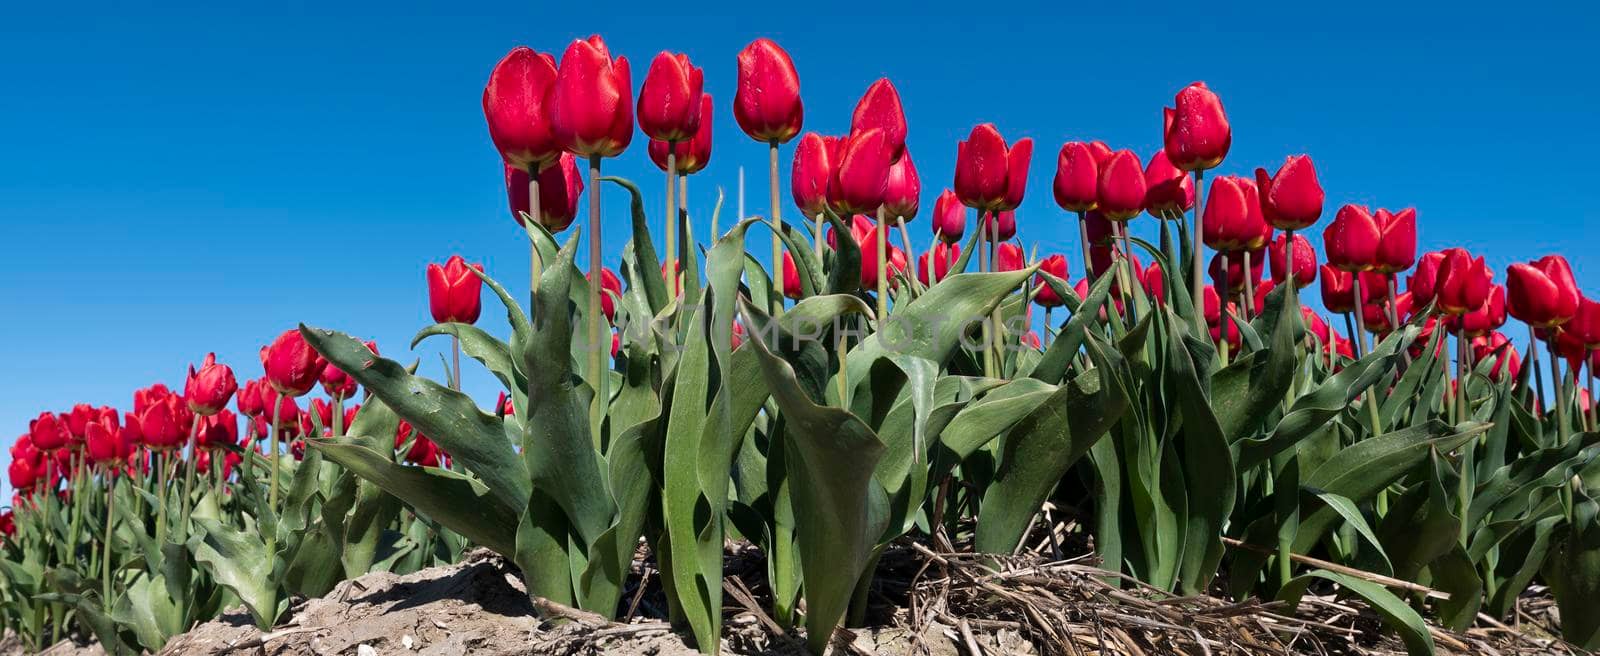 panorama picture with red tulips in field under blue sky